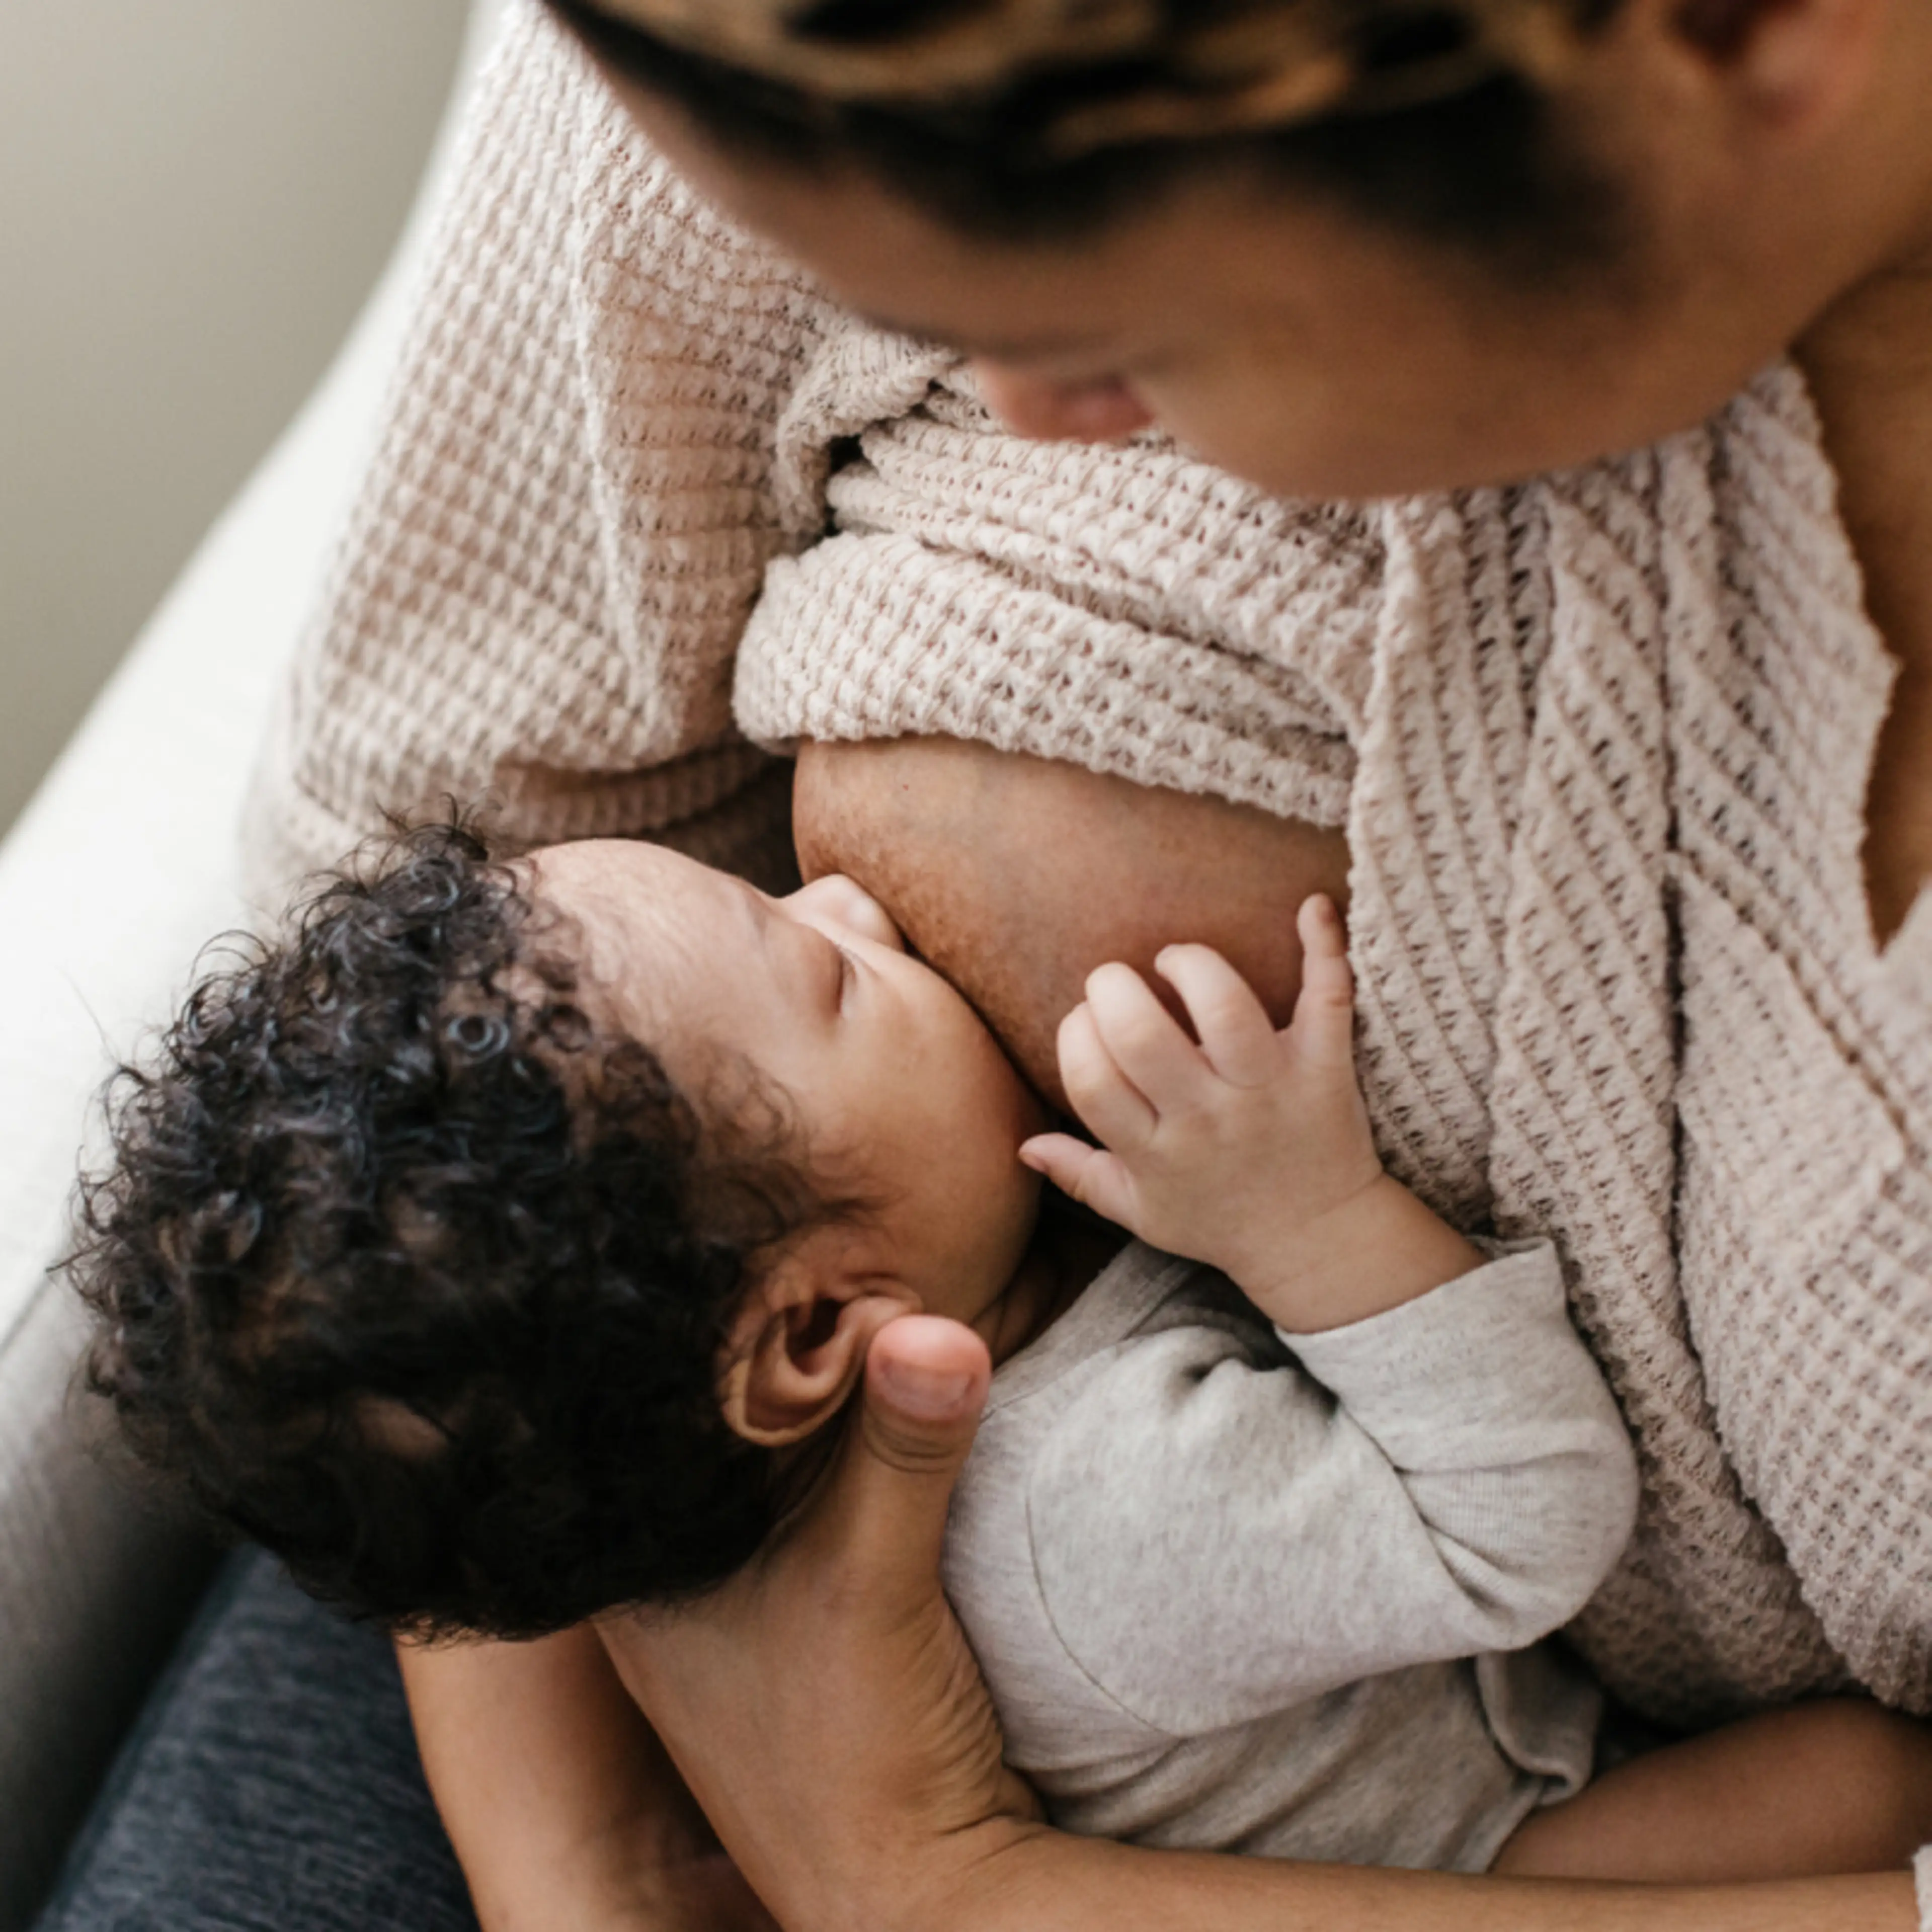 Lactation Consultant Q+A: 5 Unexpected Truths About Breastfeeding